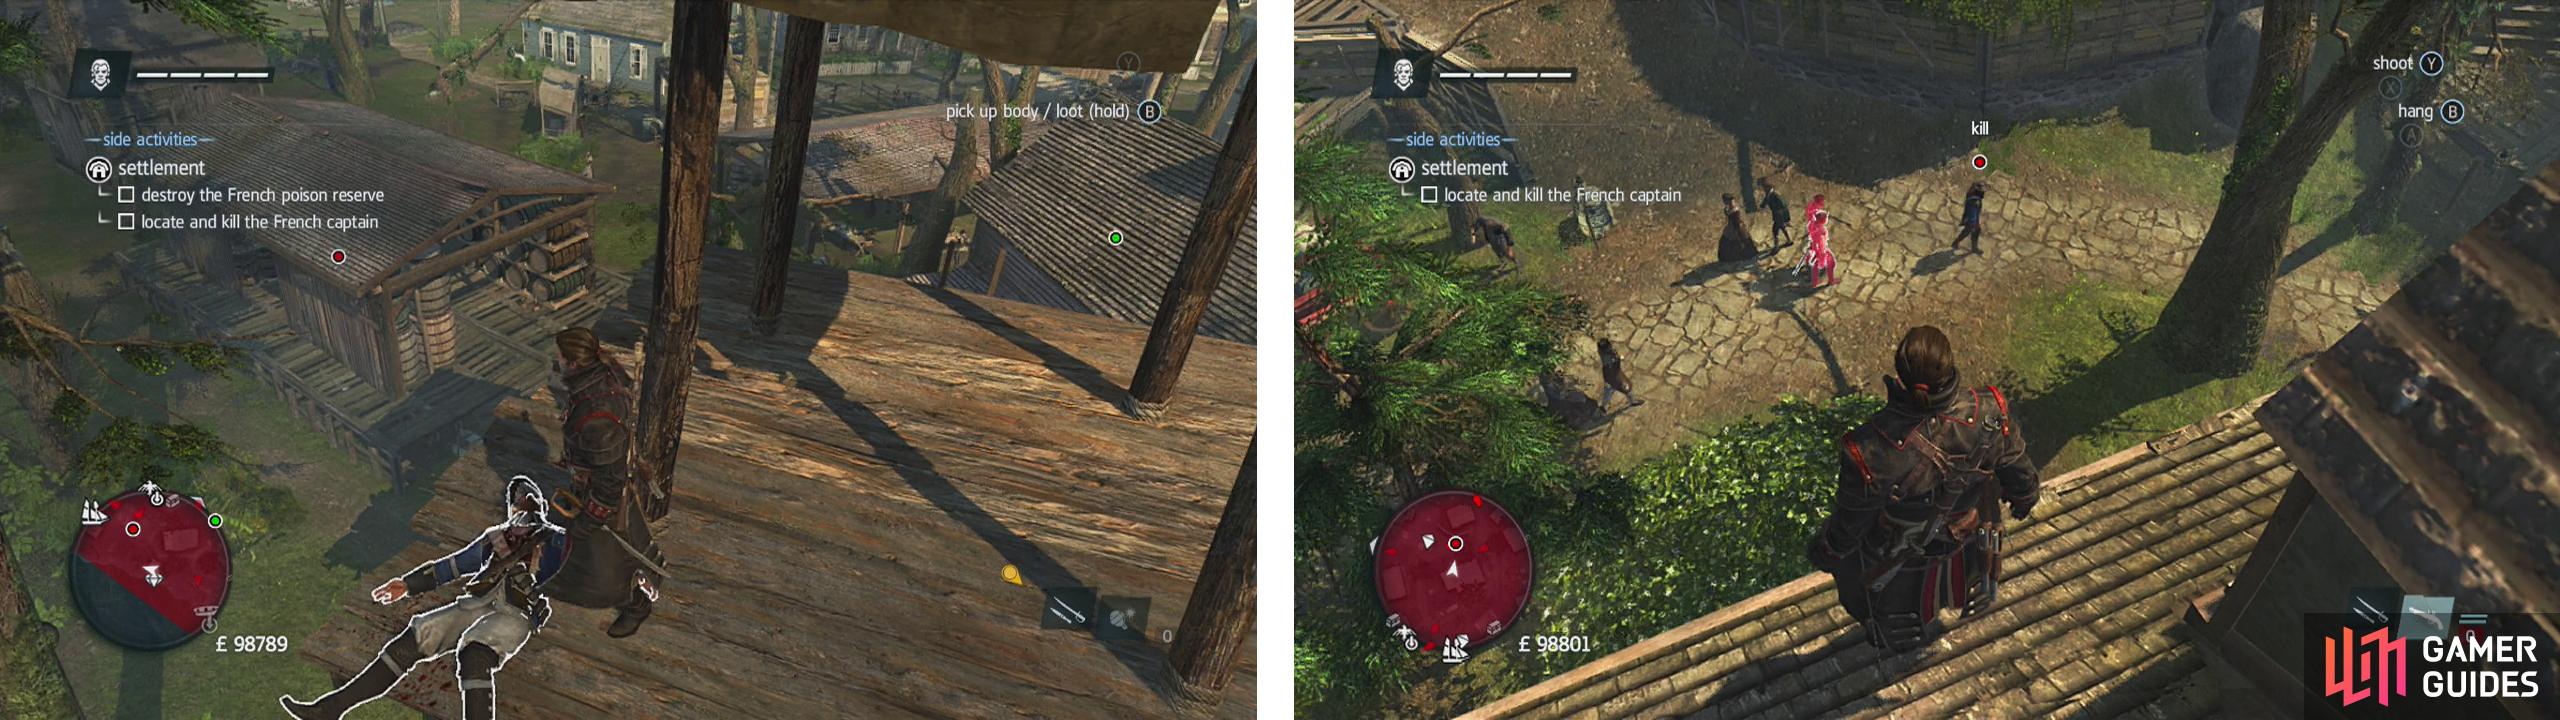 After clearing the second sniper tower, the poison barrel is in the warehouse below (left). Find the captain using eagle vision (right).